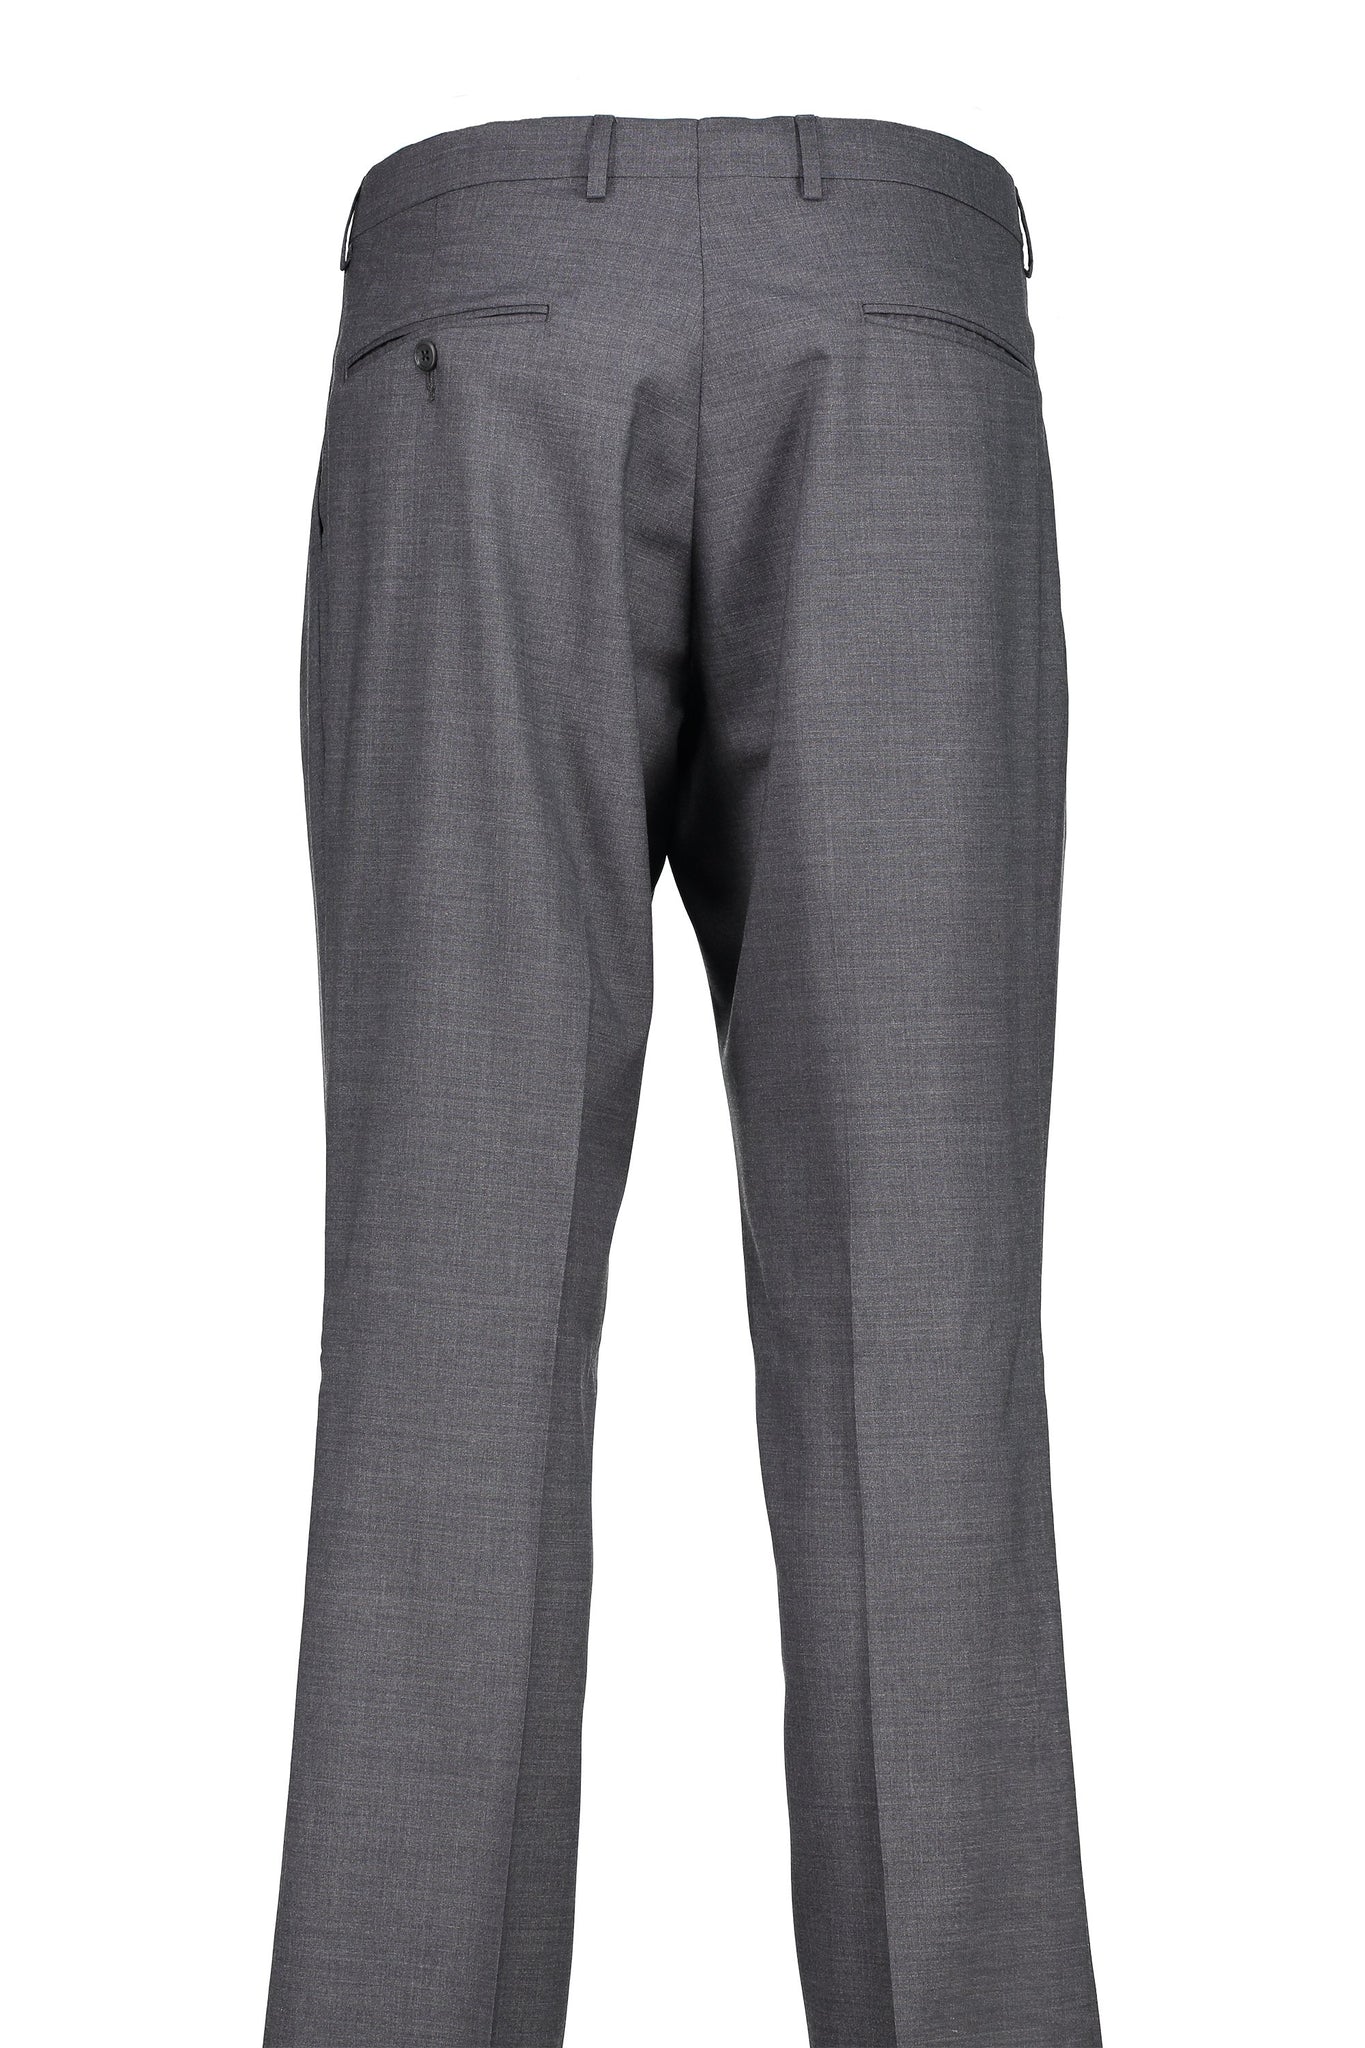 Classic Fit Grey H-Tech Wool Suit Separate Pleated Pant -  Hardwick.com